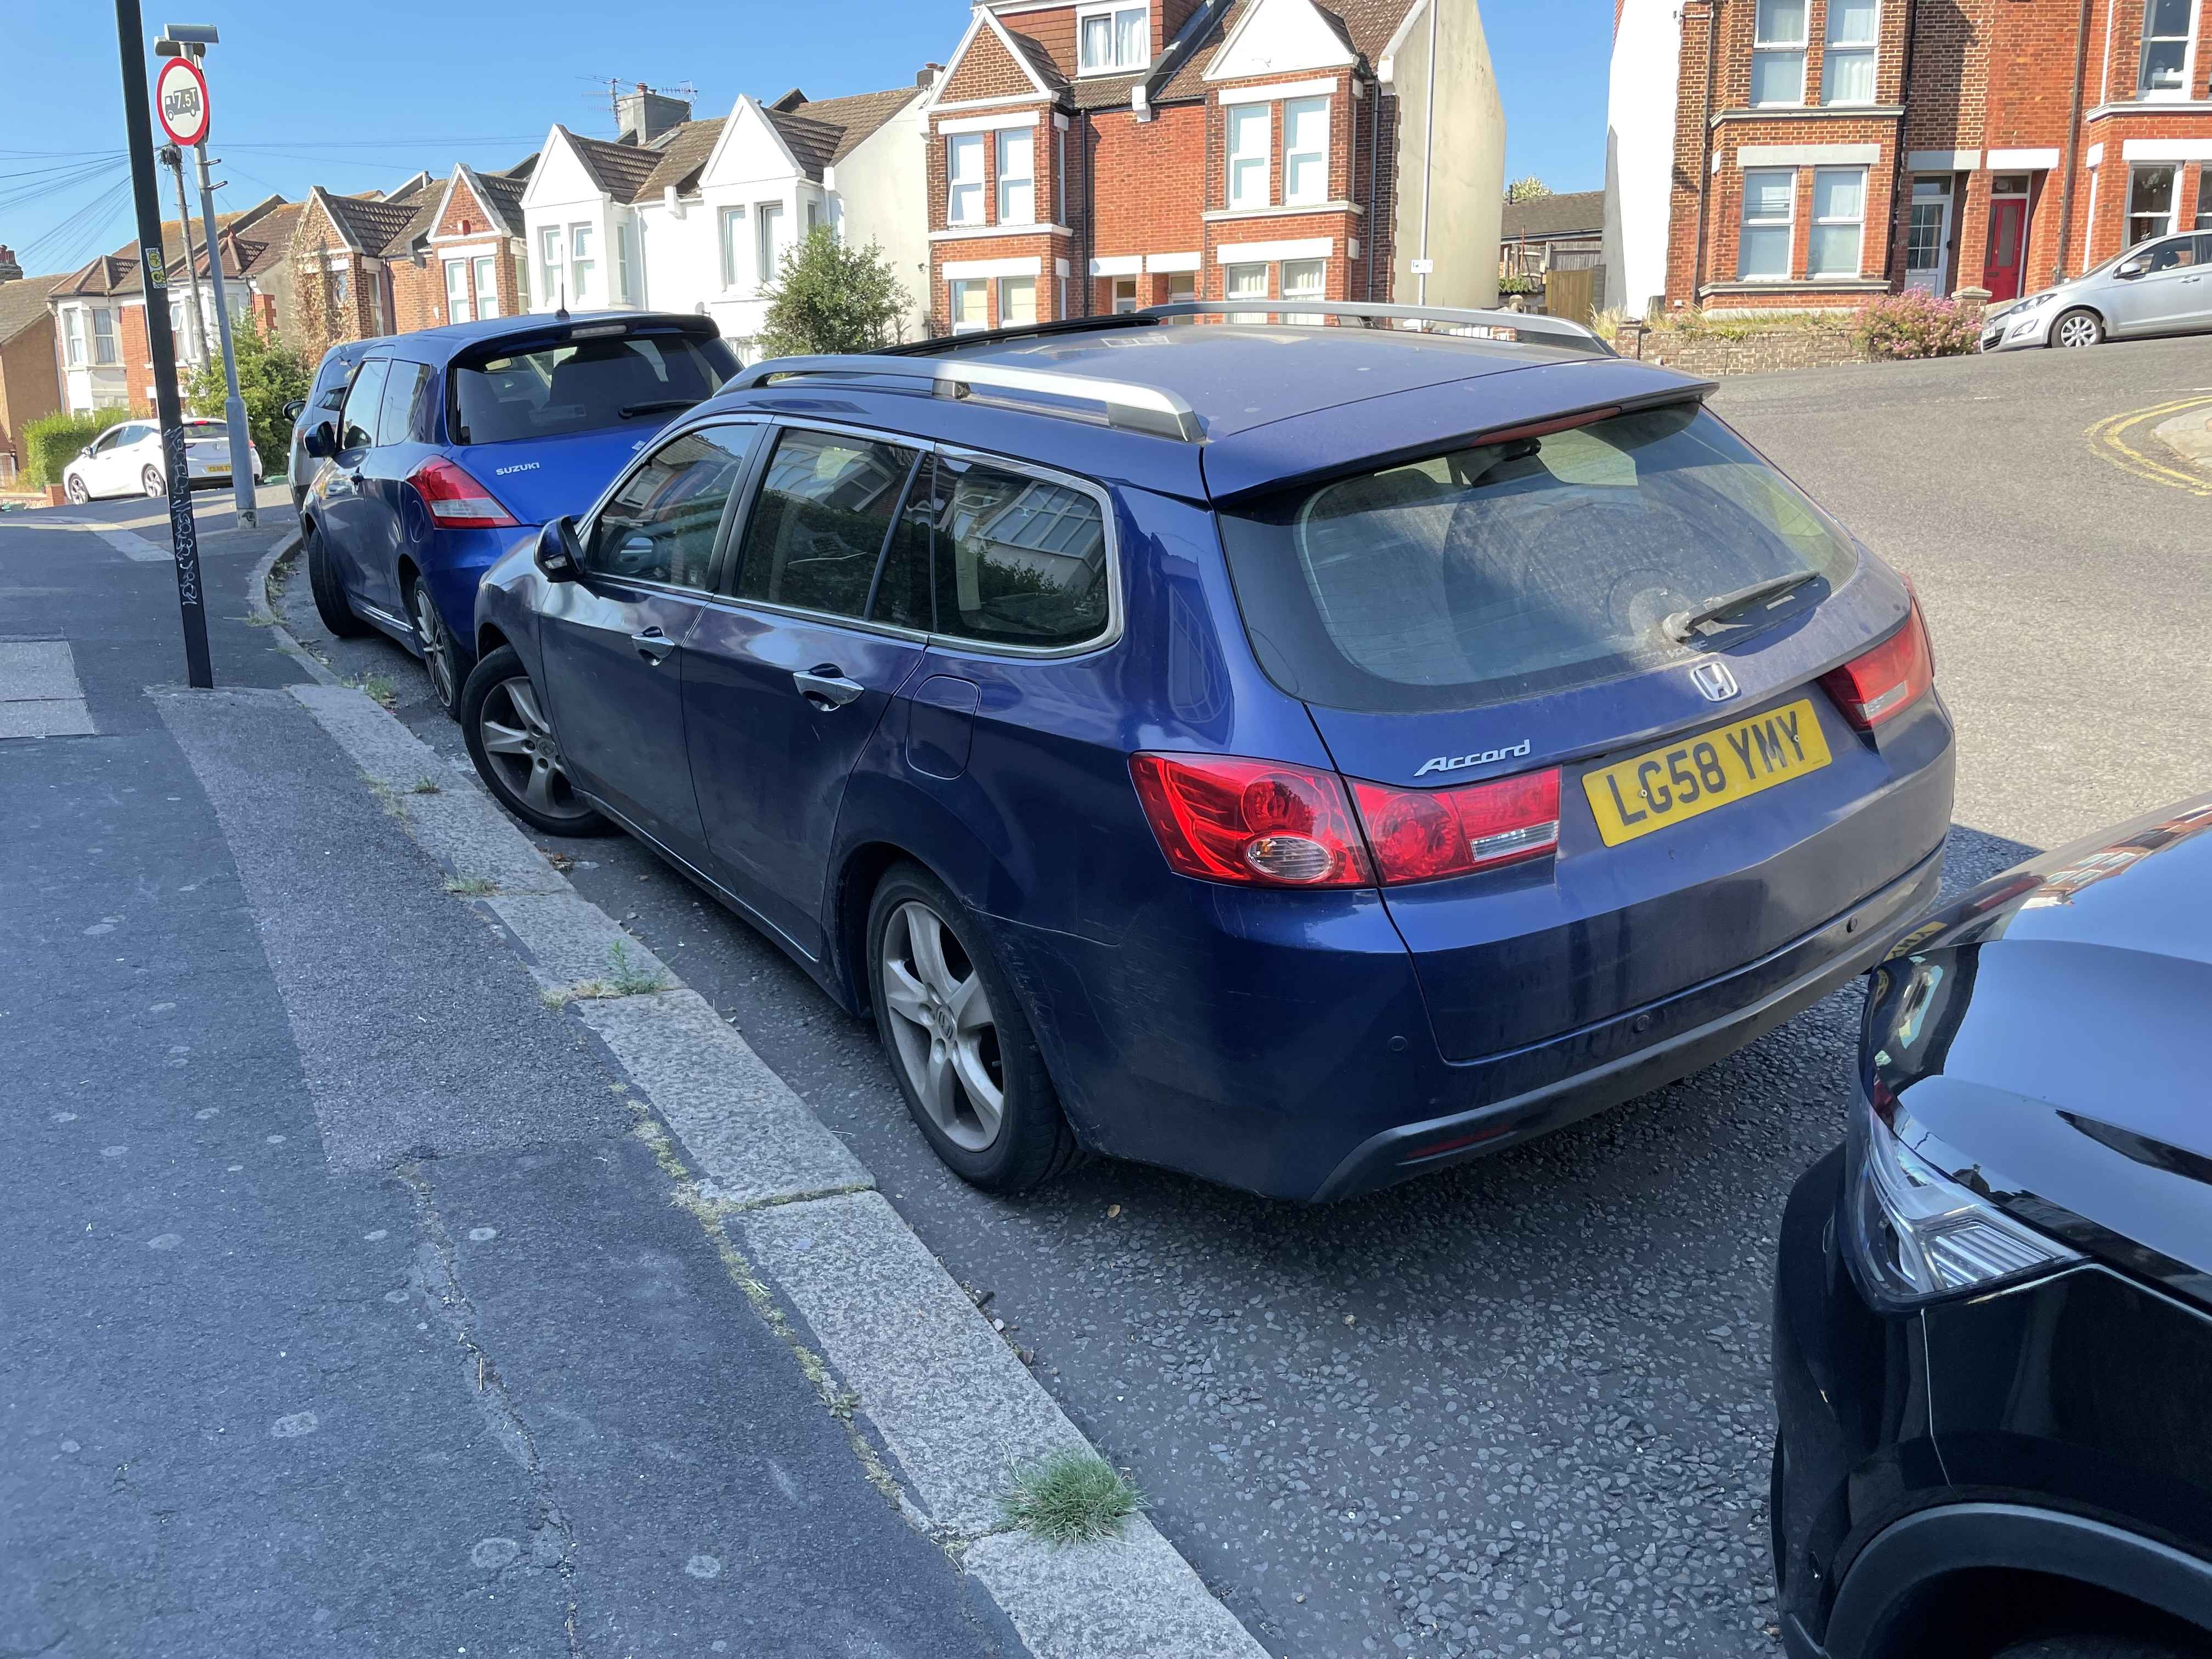 Photograph of LG58 YMY - a Blue Honda Accord parked in Hollingdean by a non-resident who uses the local area as part of their Brighton commute. The fourth of four photographs supplied by the residents of Hollingdean.